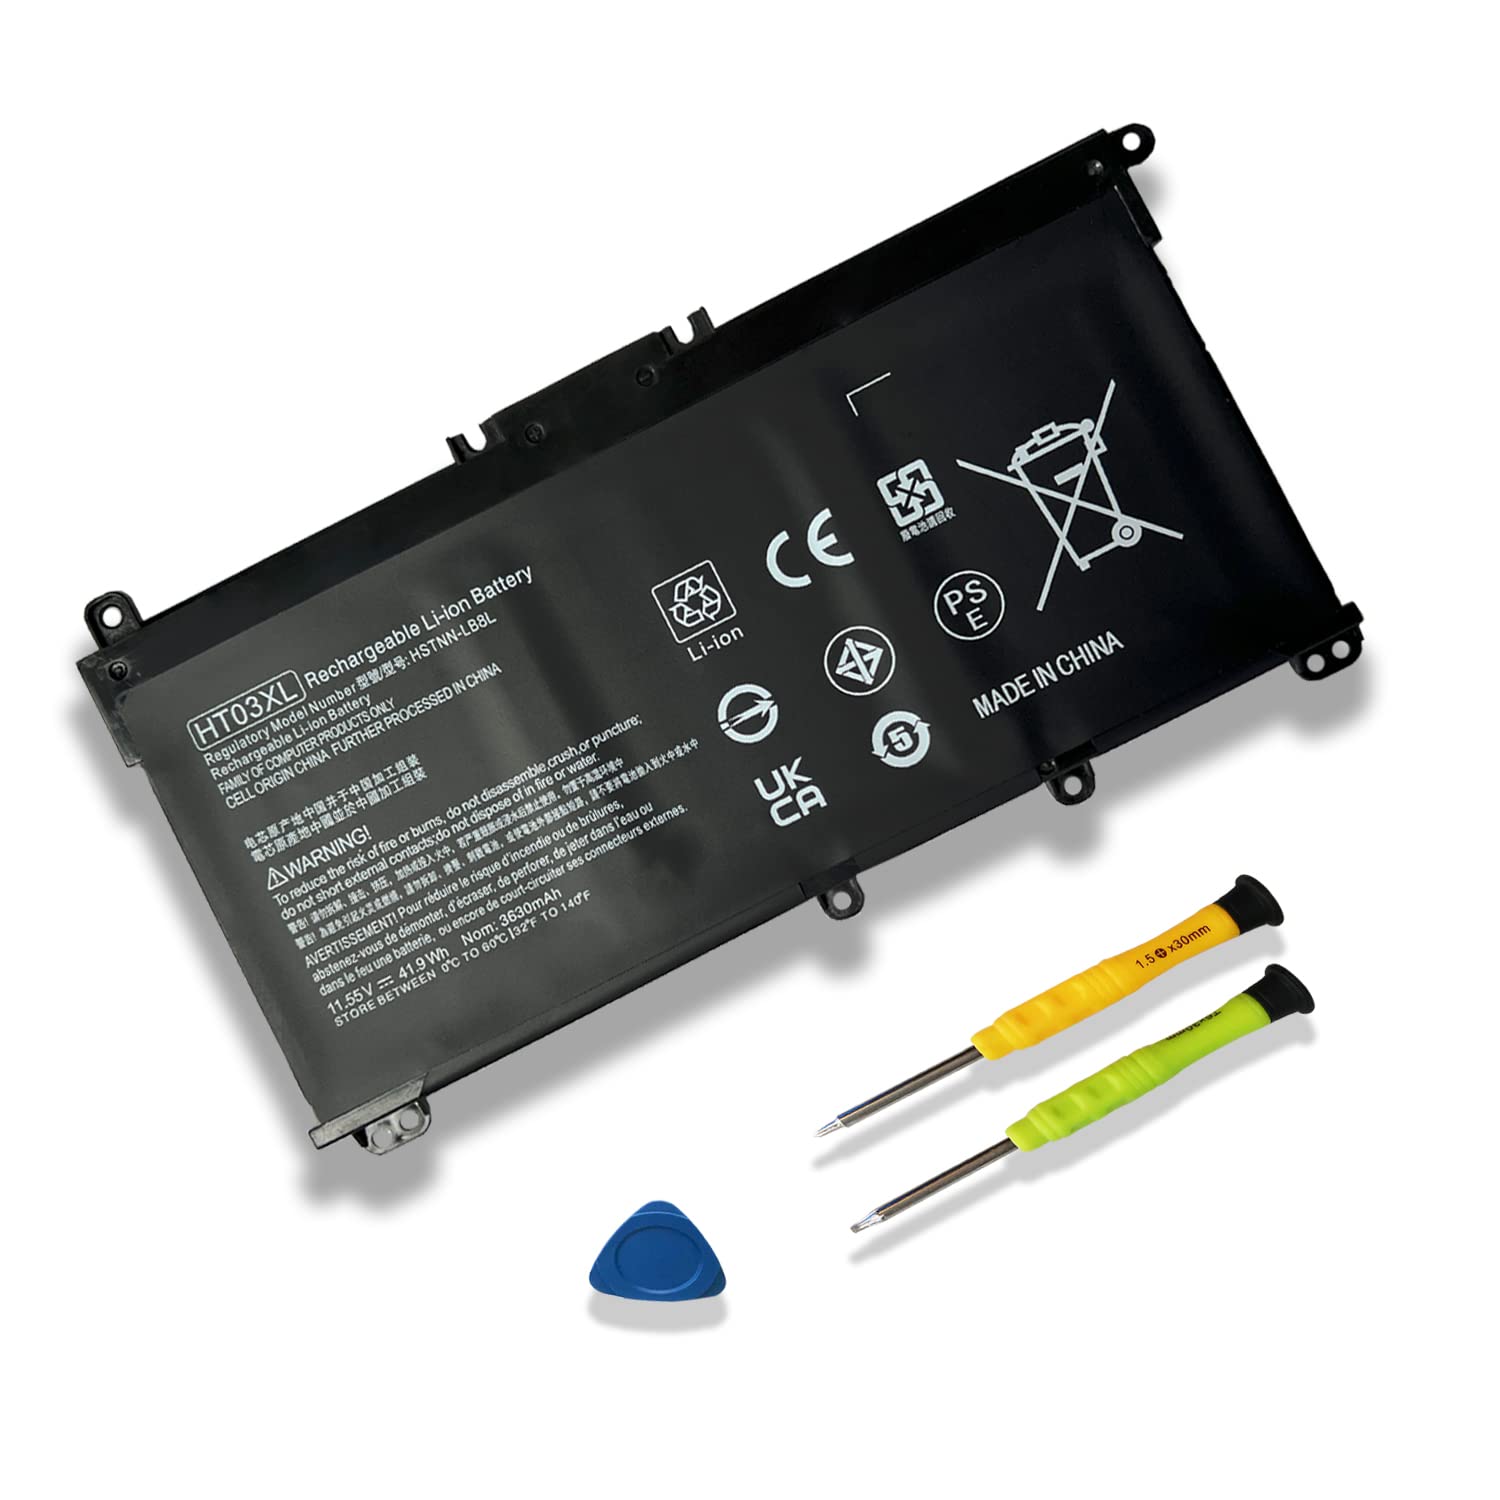 3. Replace the Battery: If the laptop battery is old or faulty, consider replacing it with a new one. Ensure compatibility with your HP laptop model.
4. Consult a Professional Repair Service: If the above steps don't resolve the issue, it may be best to seek assistance from a professional repair service. They can diagnose and fix more complex hardware or internal power-related problems.